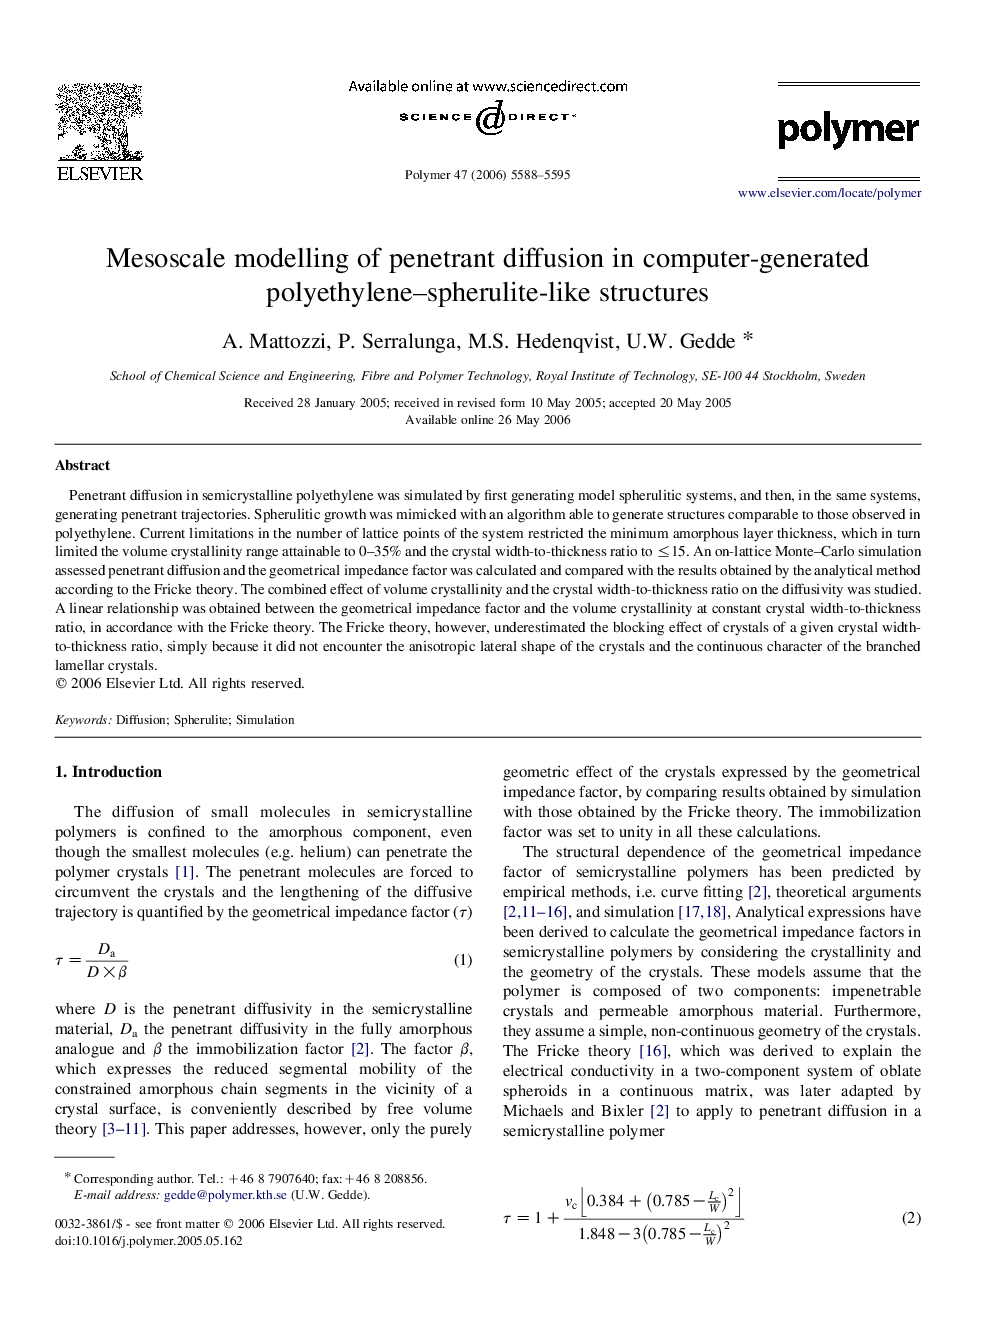 Mesoscale modelling of penetrant diffusion in computer-generated polyethylene-spherulite-like structures